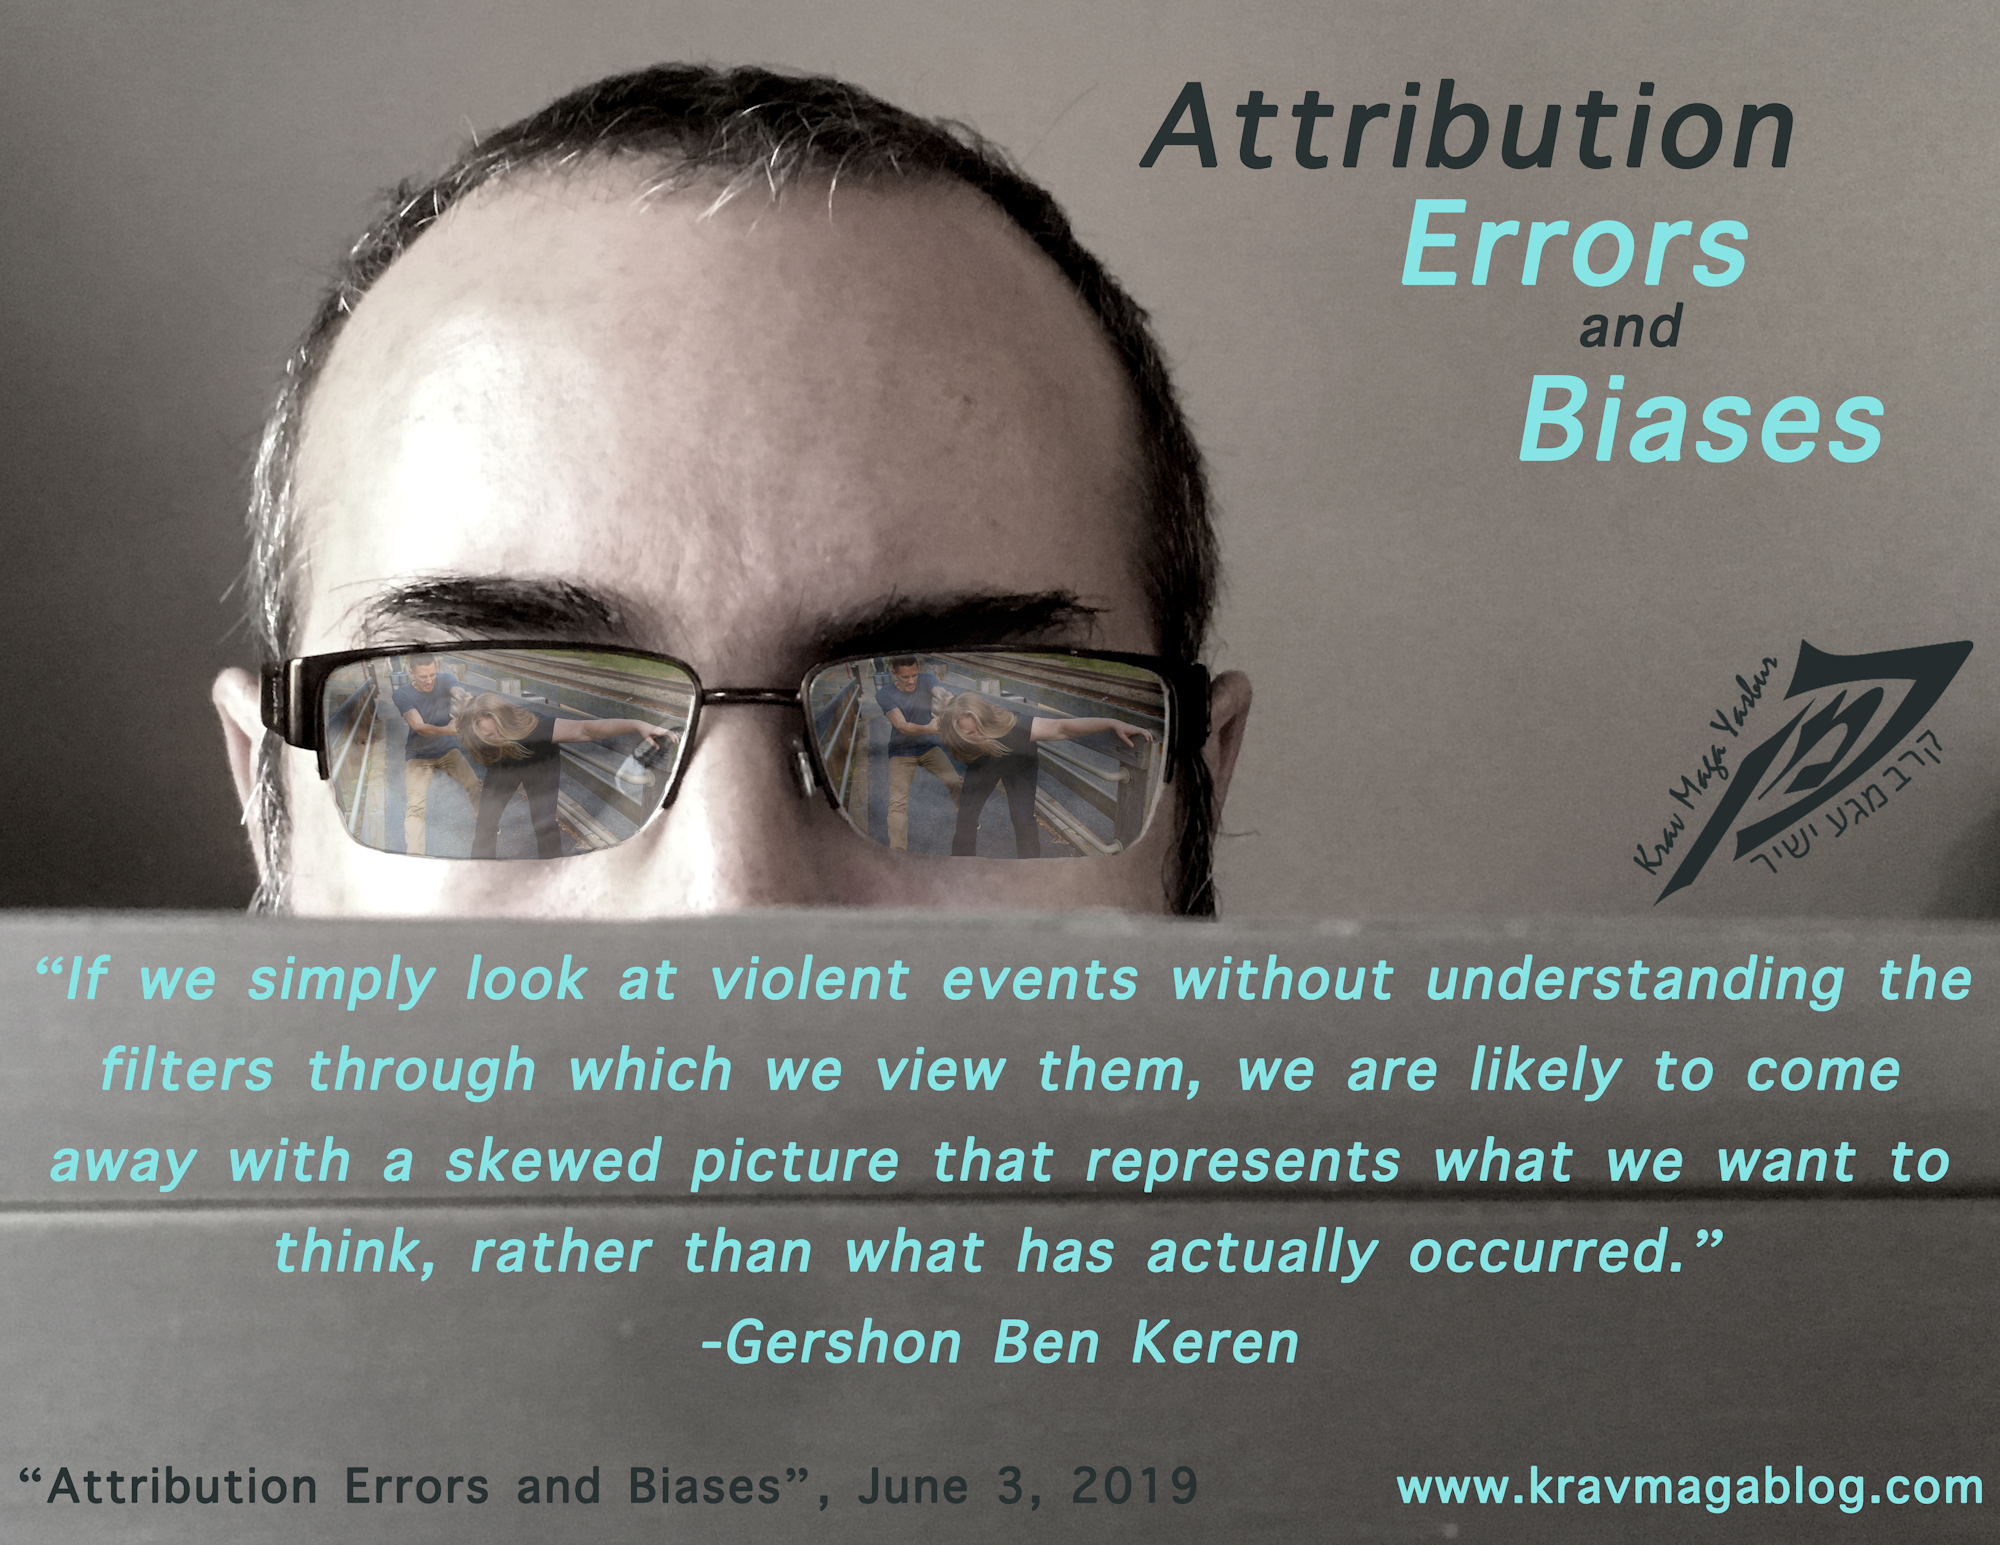 Blog About Attribution Errors & Biases